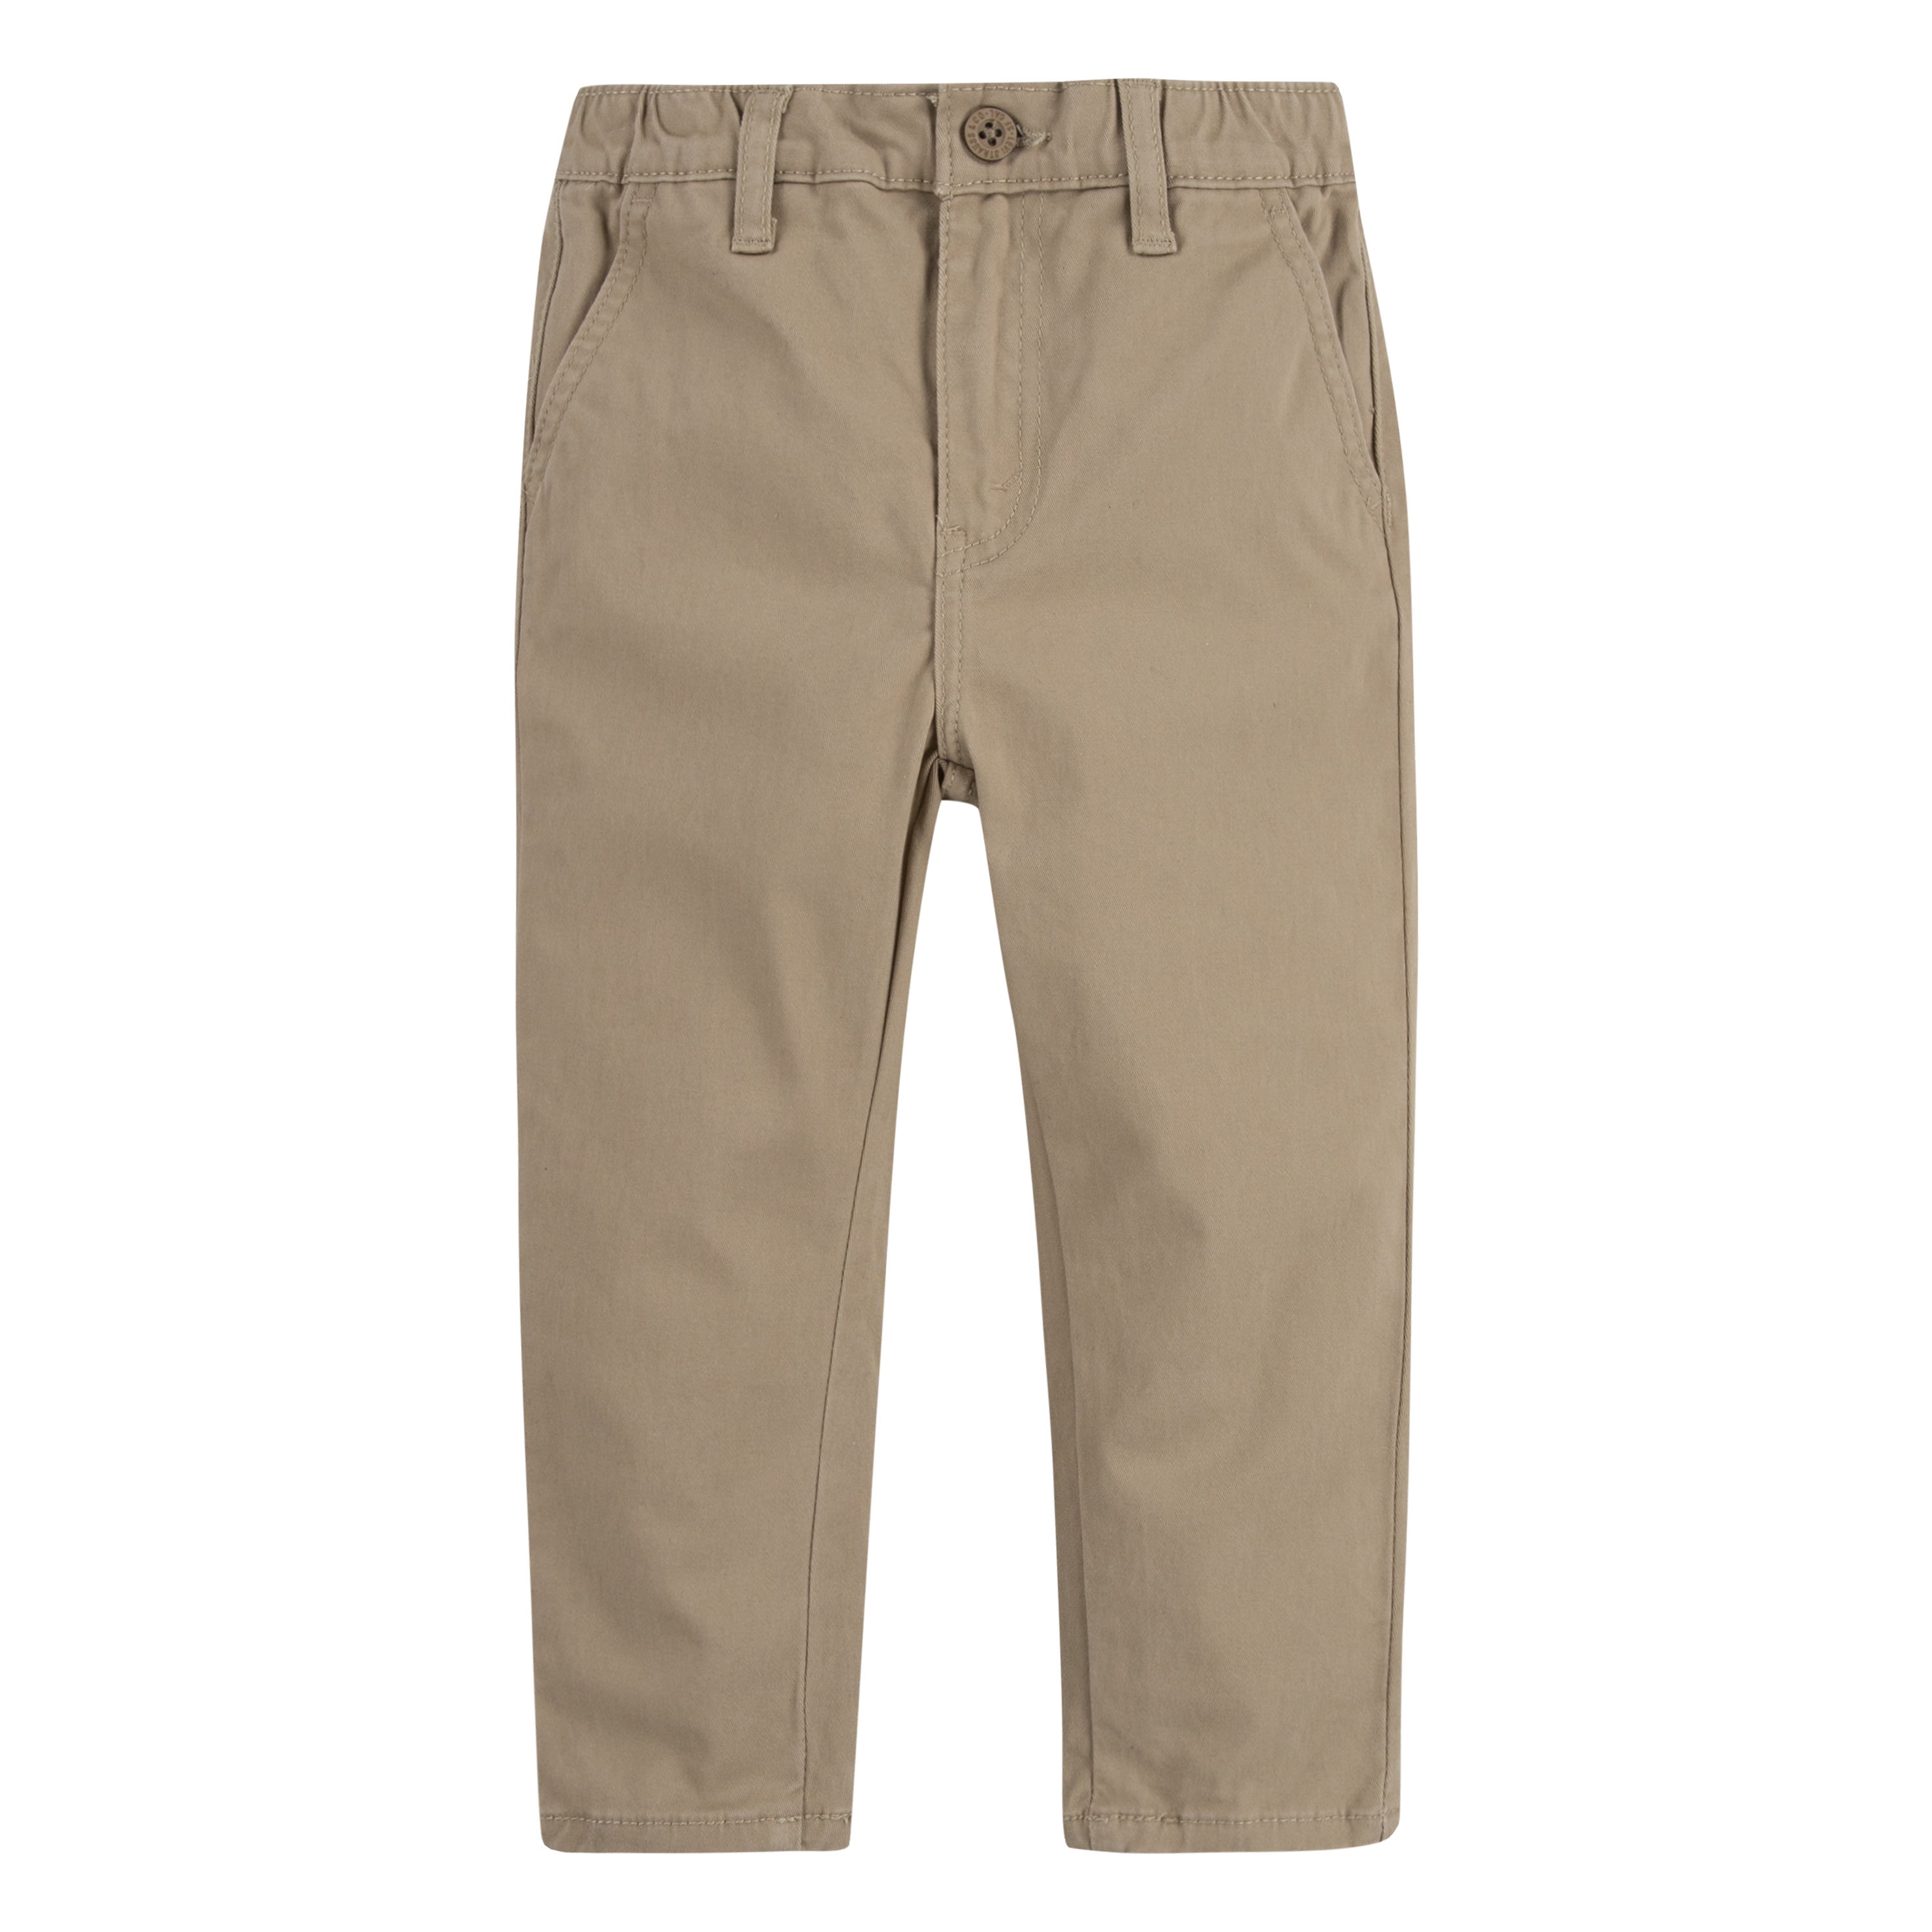 The Children's Place Boys 2-Pack Stretch Chino Woven Bottoms, Sizes 4-16 